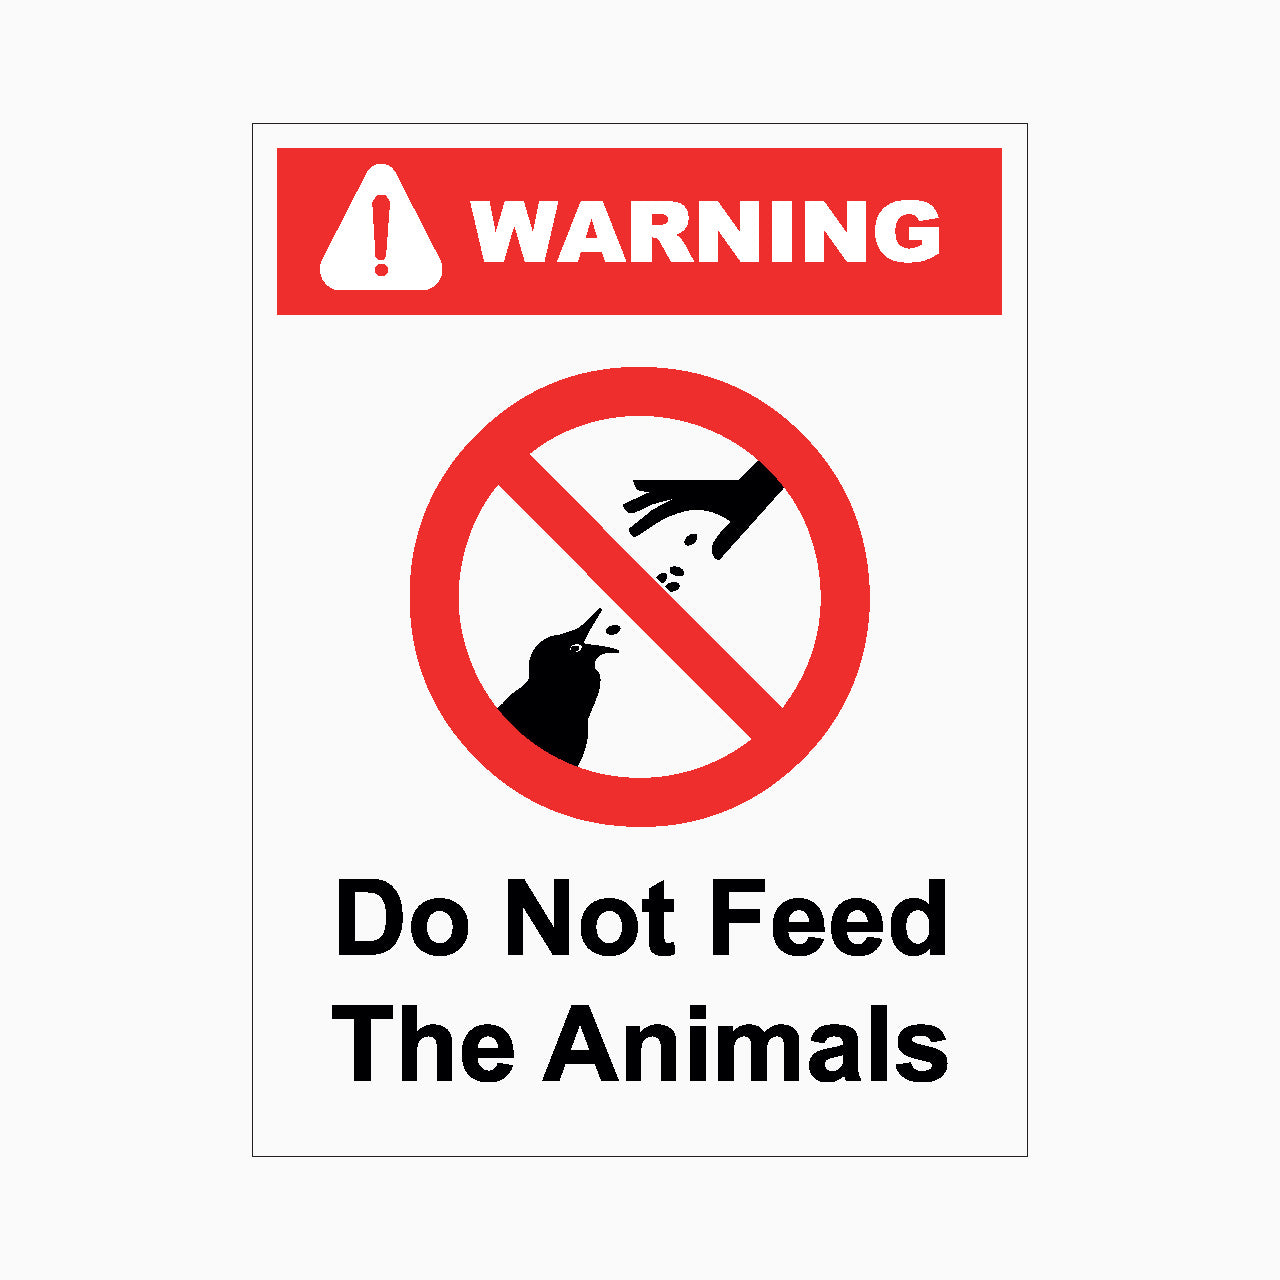 PLEASE DO NOT FEED THE ANIMALS SIGN - WARNING SIGN